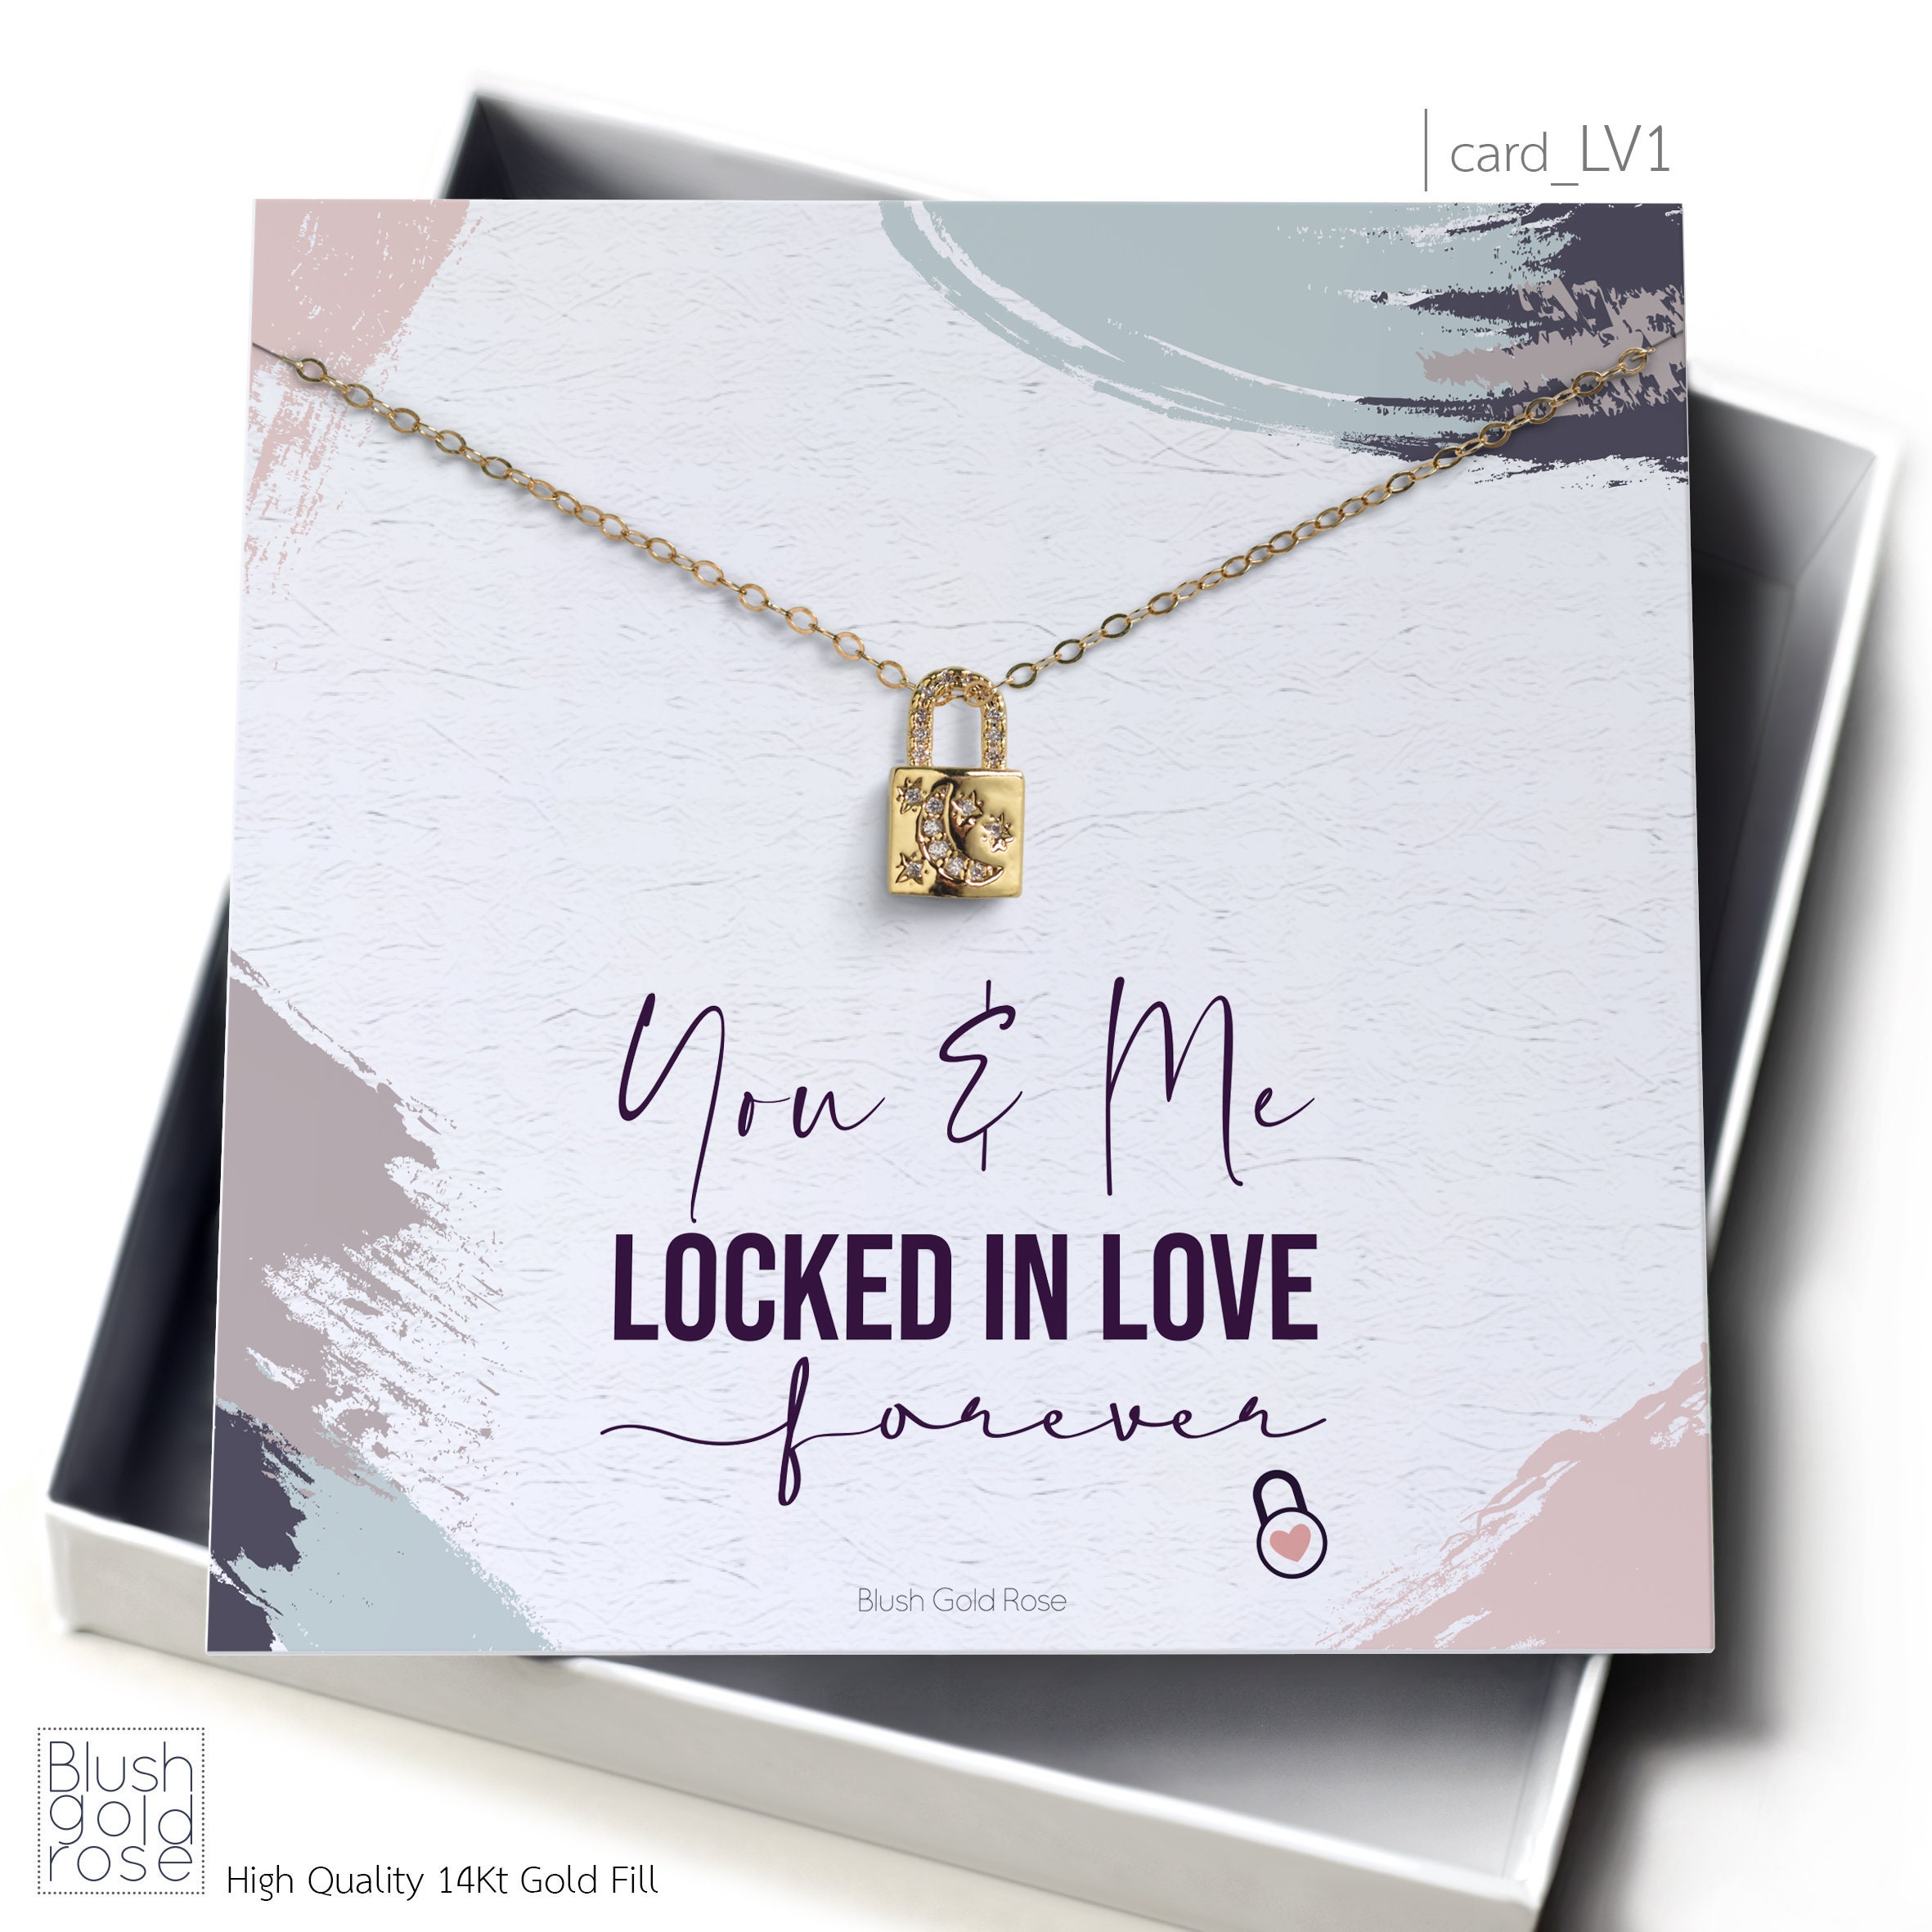 Looking for a Love Lock Necklace for Good Luck? – Vida Jewelers